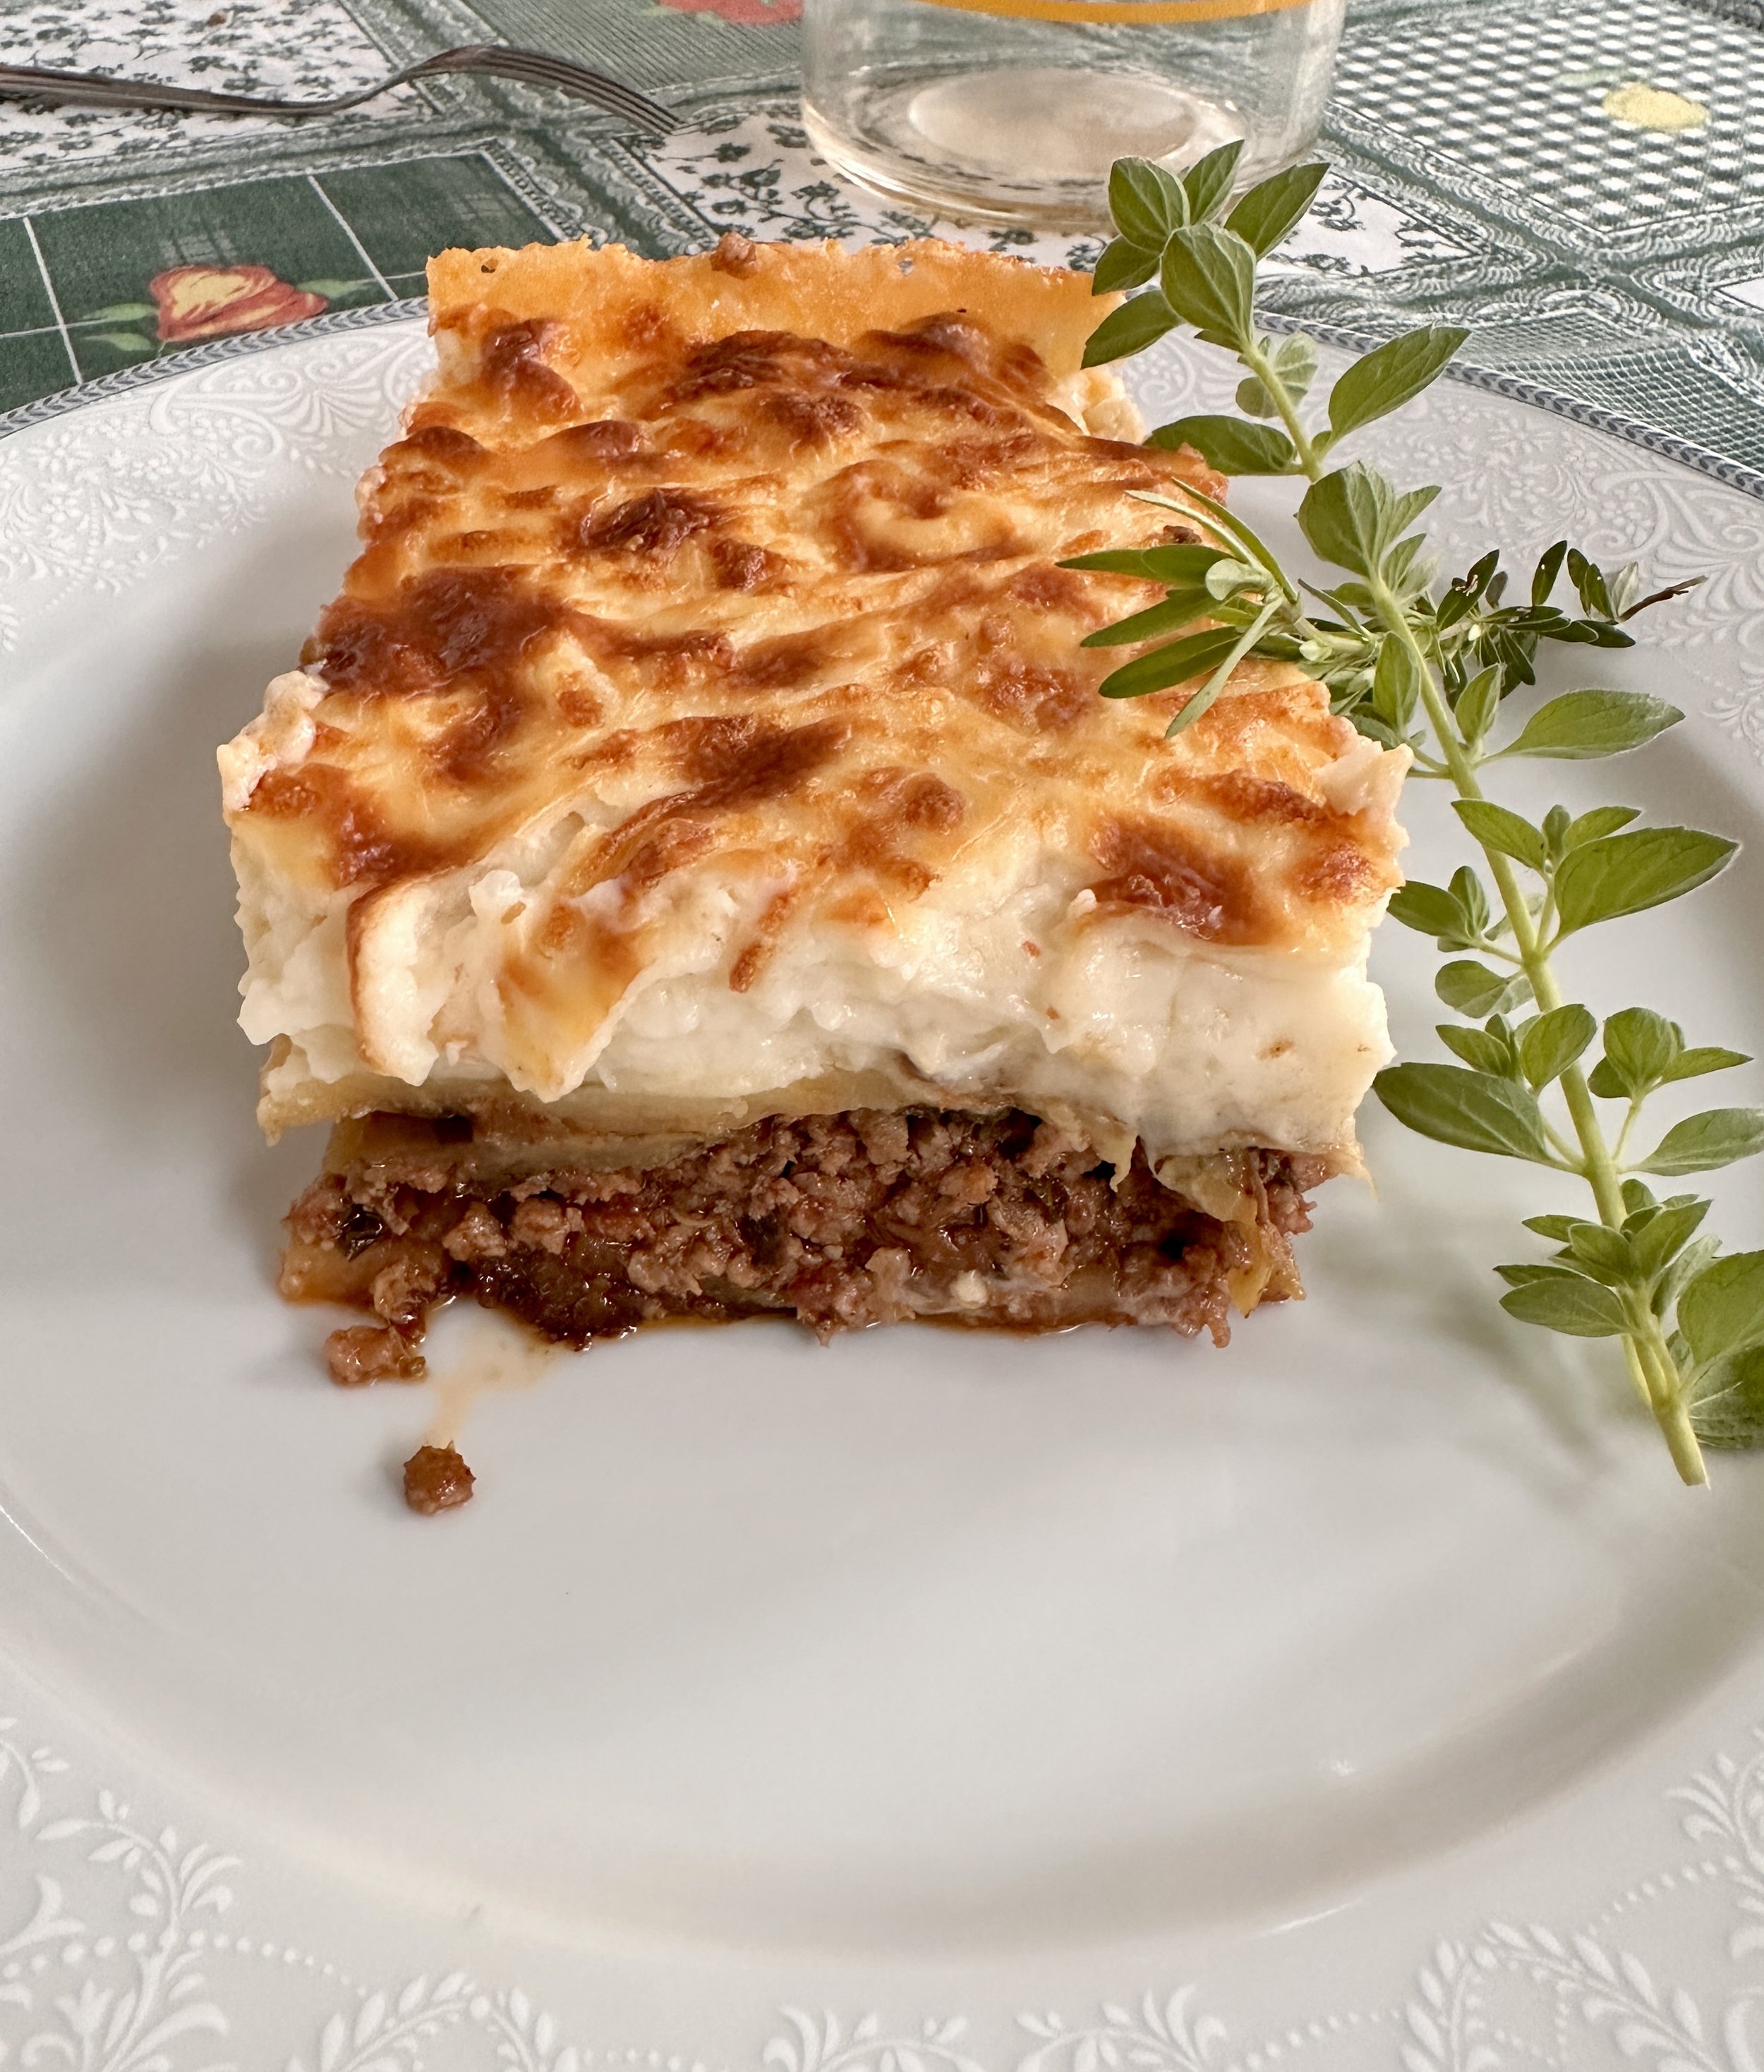 Moussaka made in Dion, Greece